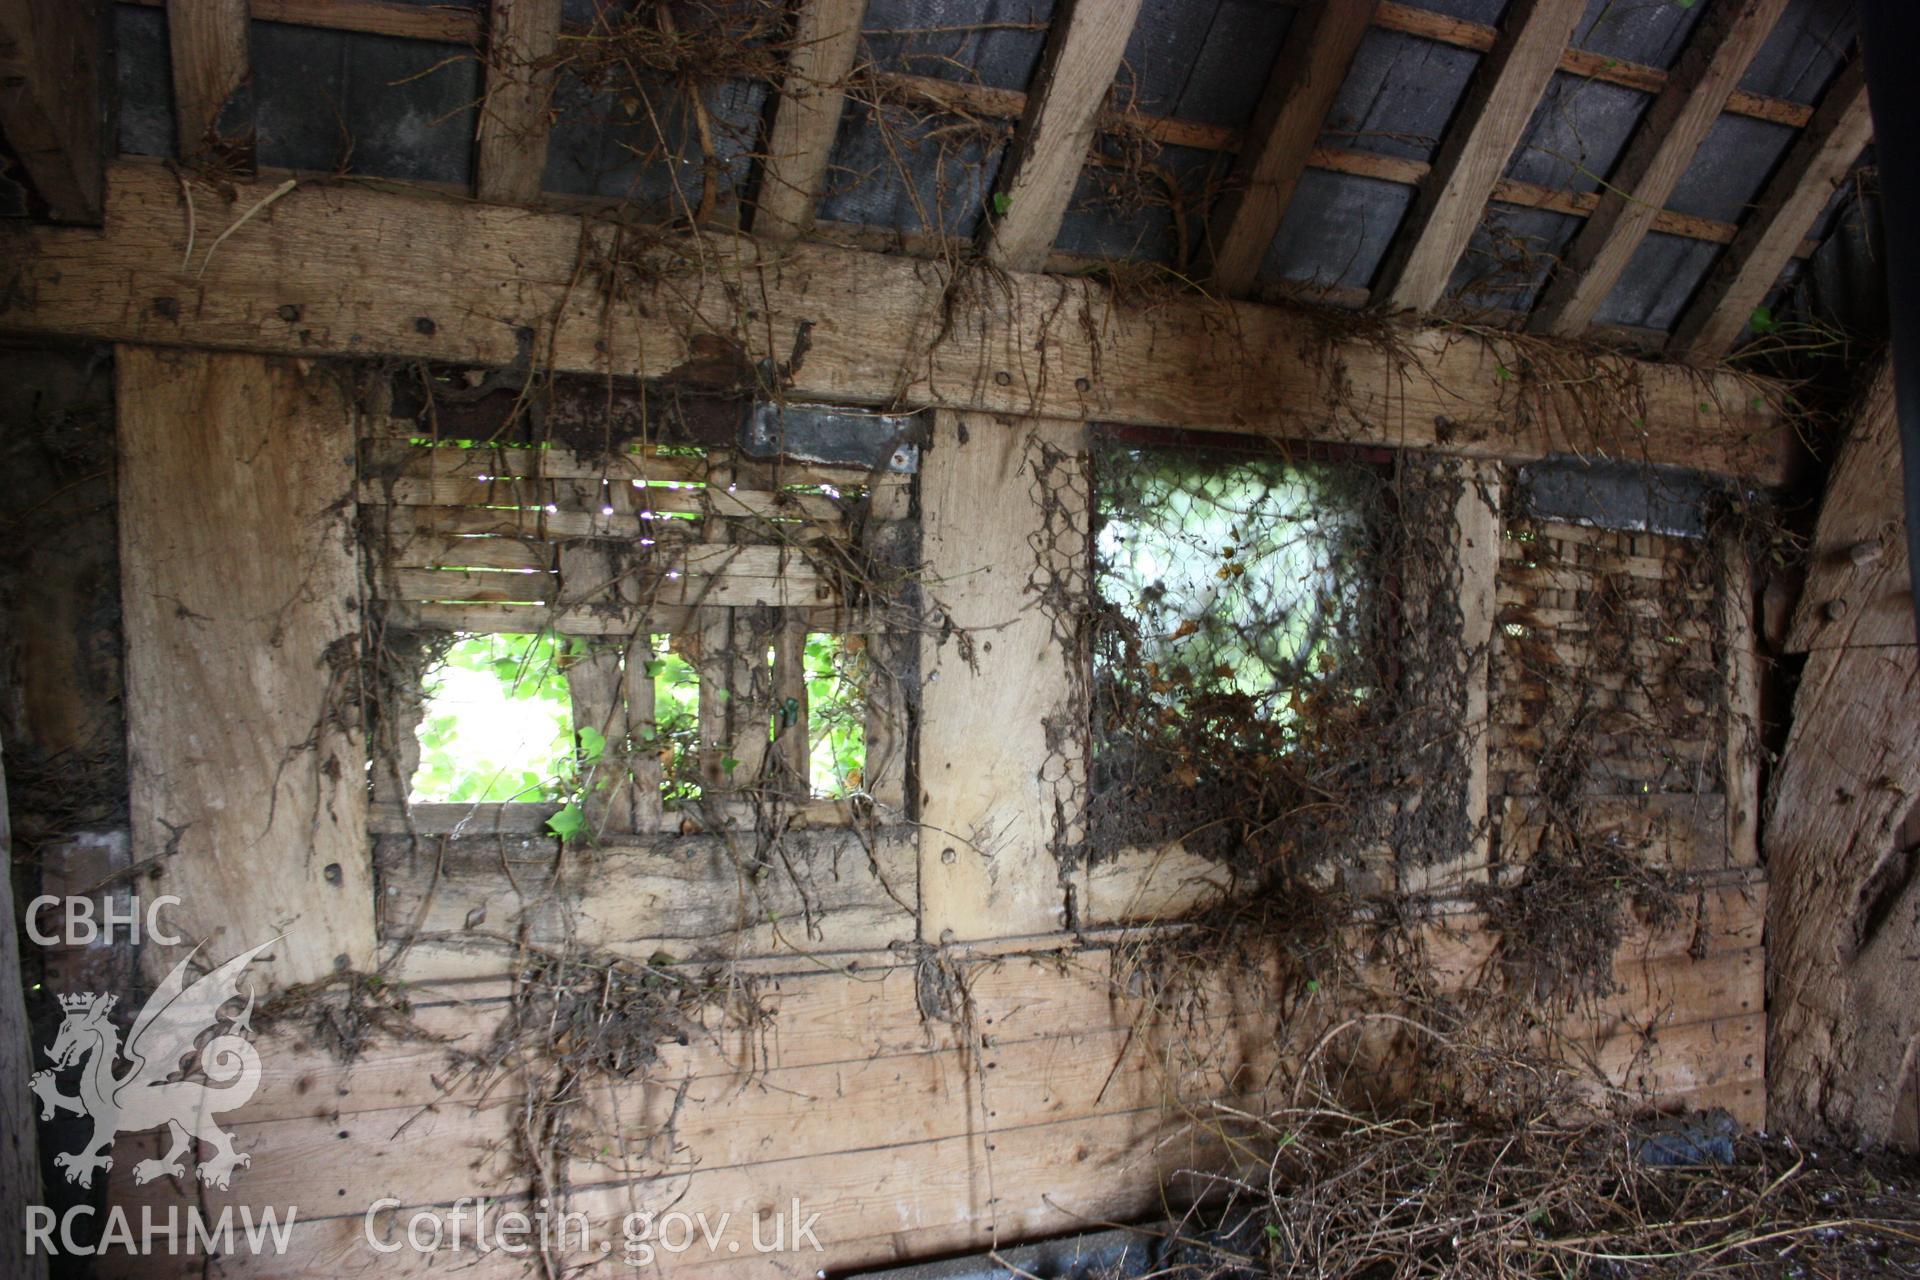 Internal view of wooden panelling, beams and overgrown window spaces. Photographic survey of Marian Mawr in Cwm, Denbighshire by Geoff Ward on 20th August 2010.